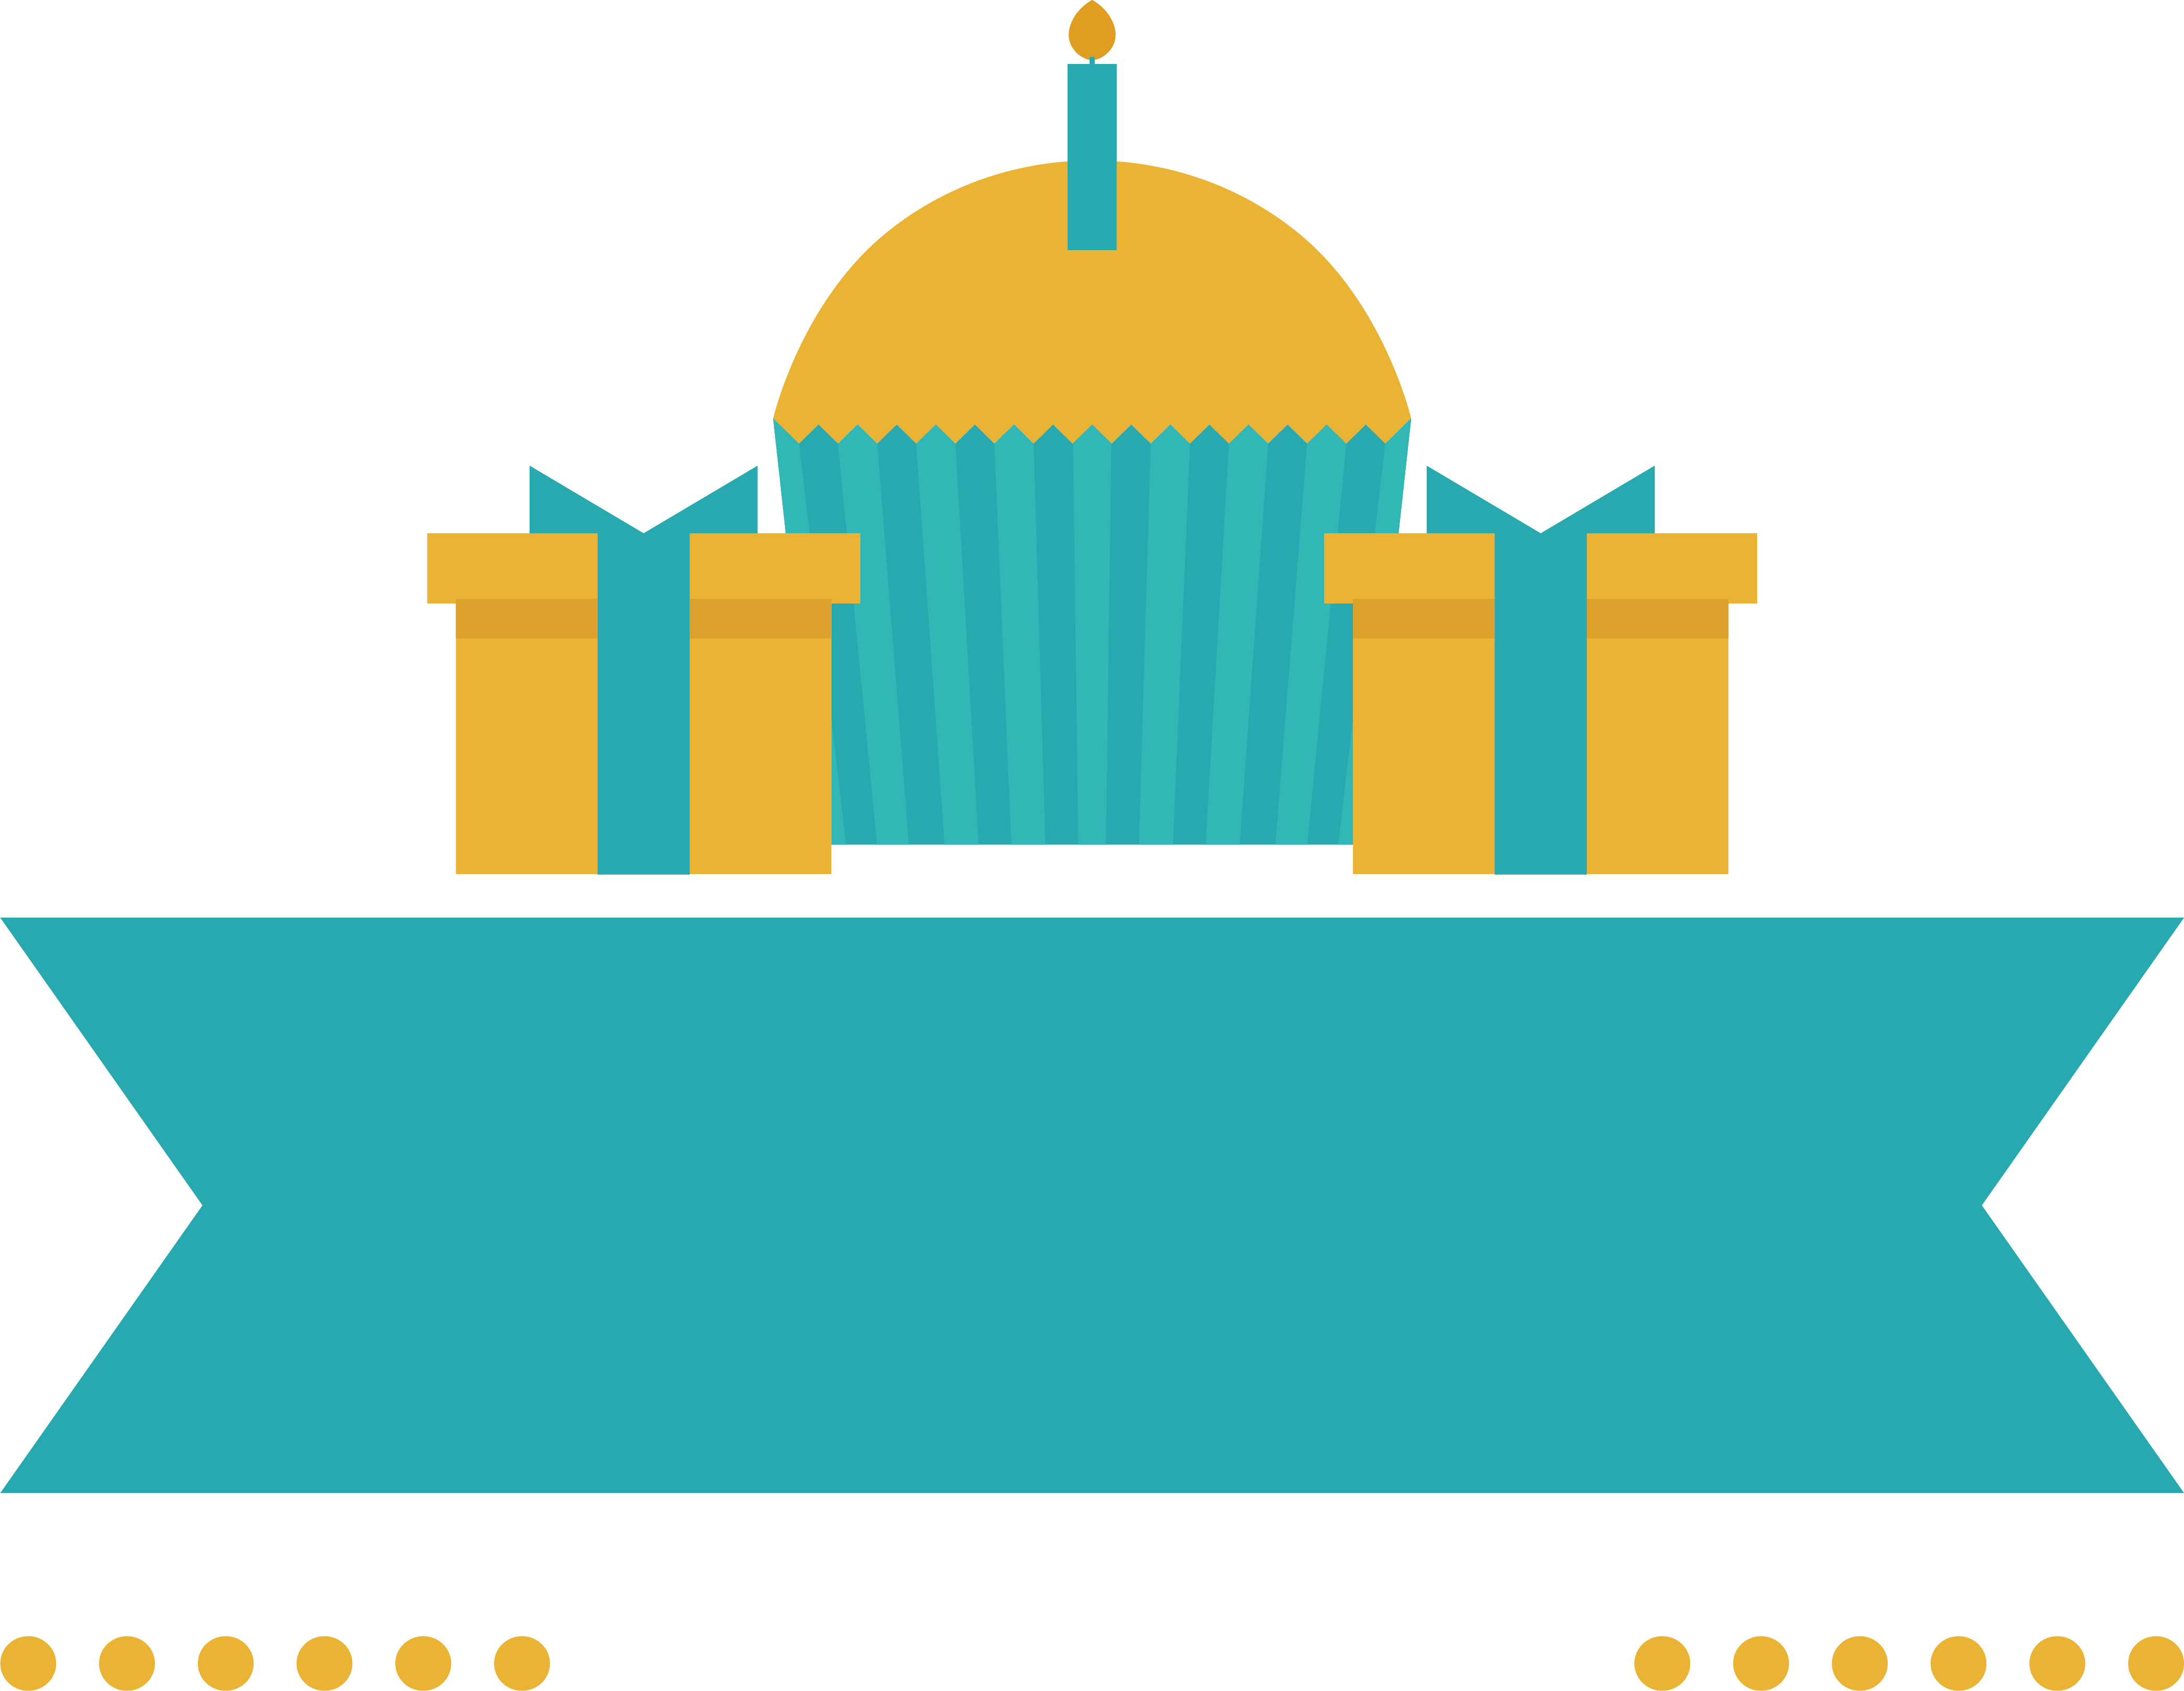 clipart cake teal